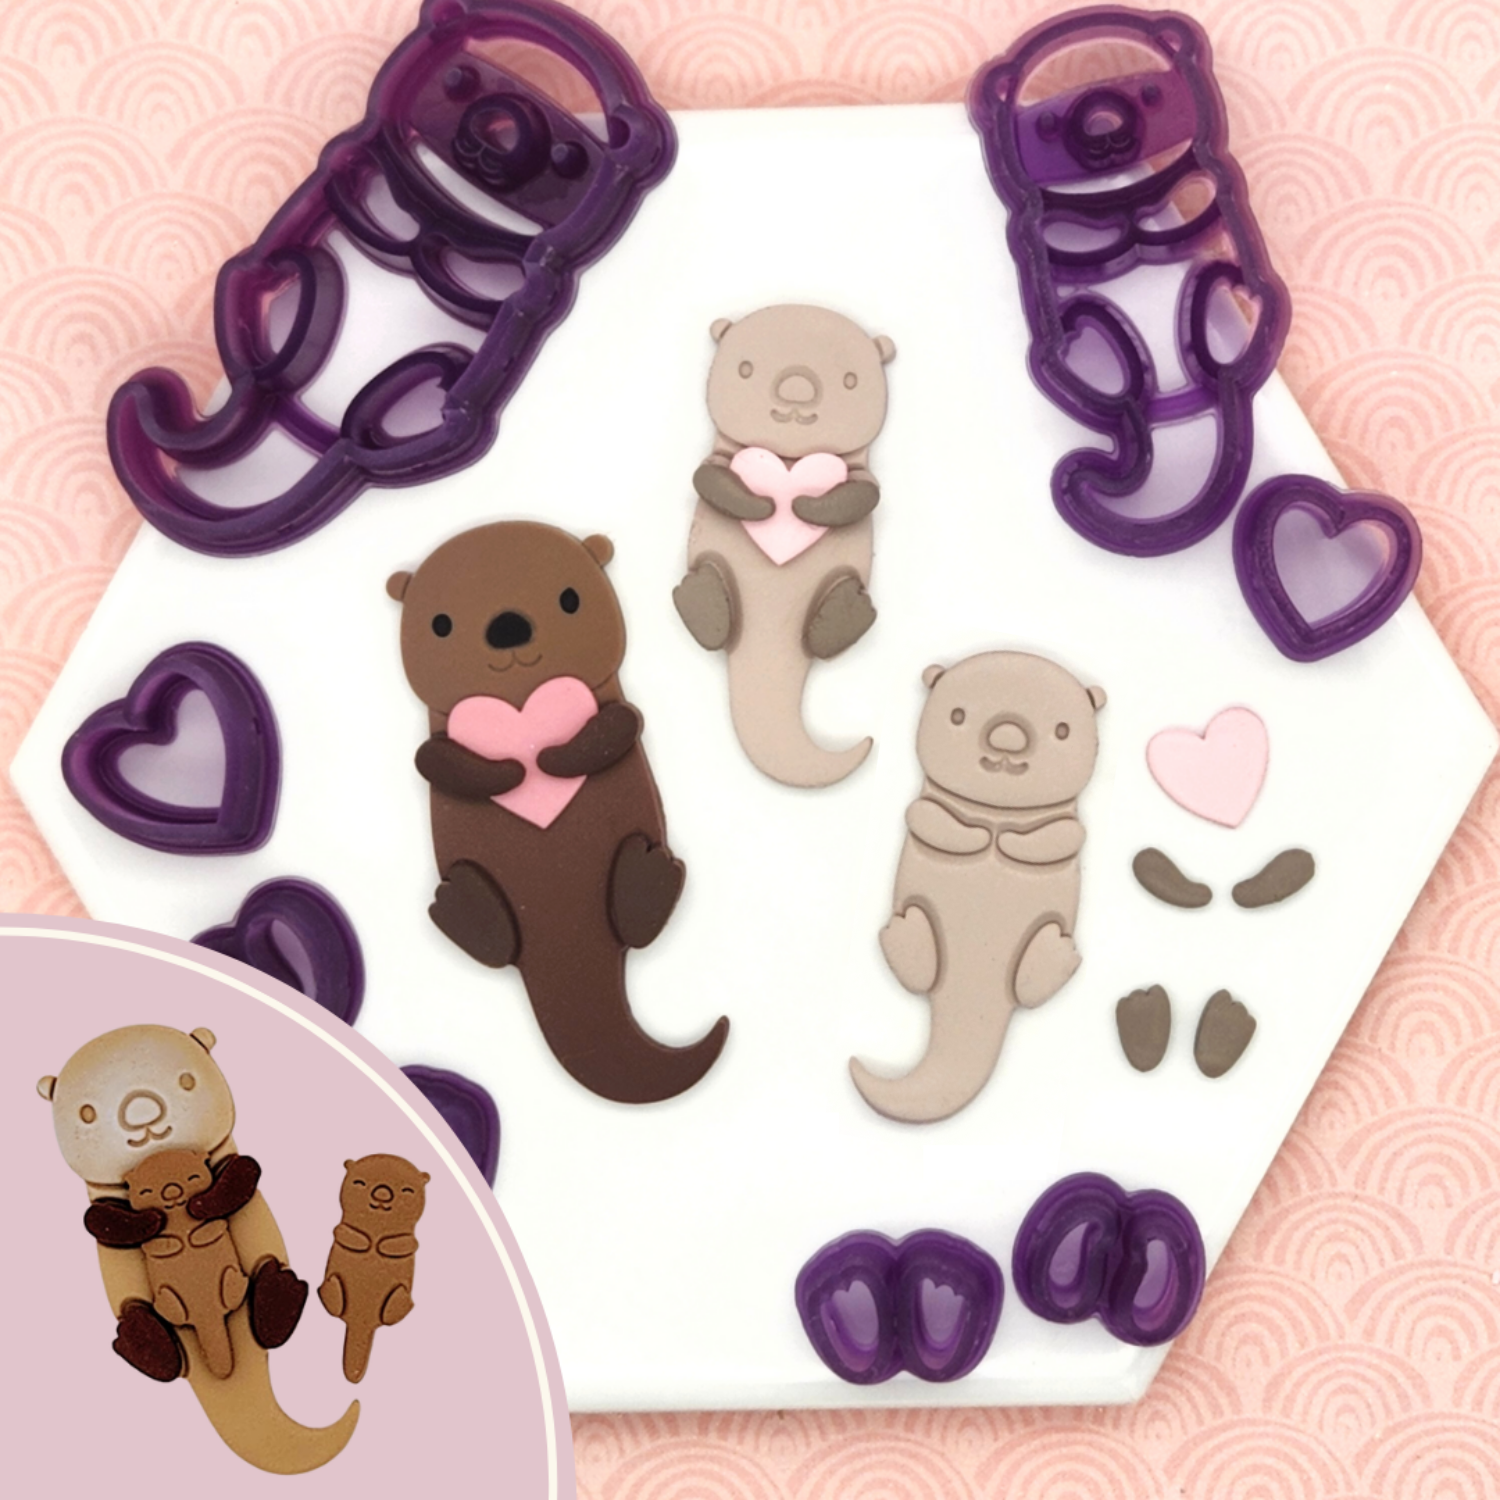 Otter Love Valentine's Day heart clay cutter. Otter Love clay cutter set includes Otter, heart, a double-paws cutter, and a double-flipper cutter. In photo, sample finish product in polymer clay and Otter Love clay cutter set